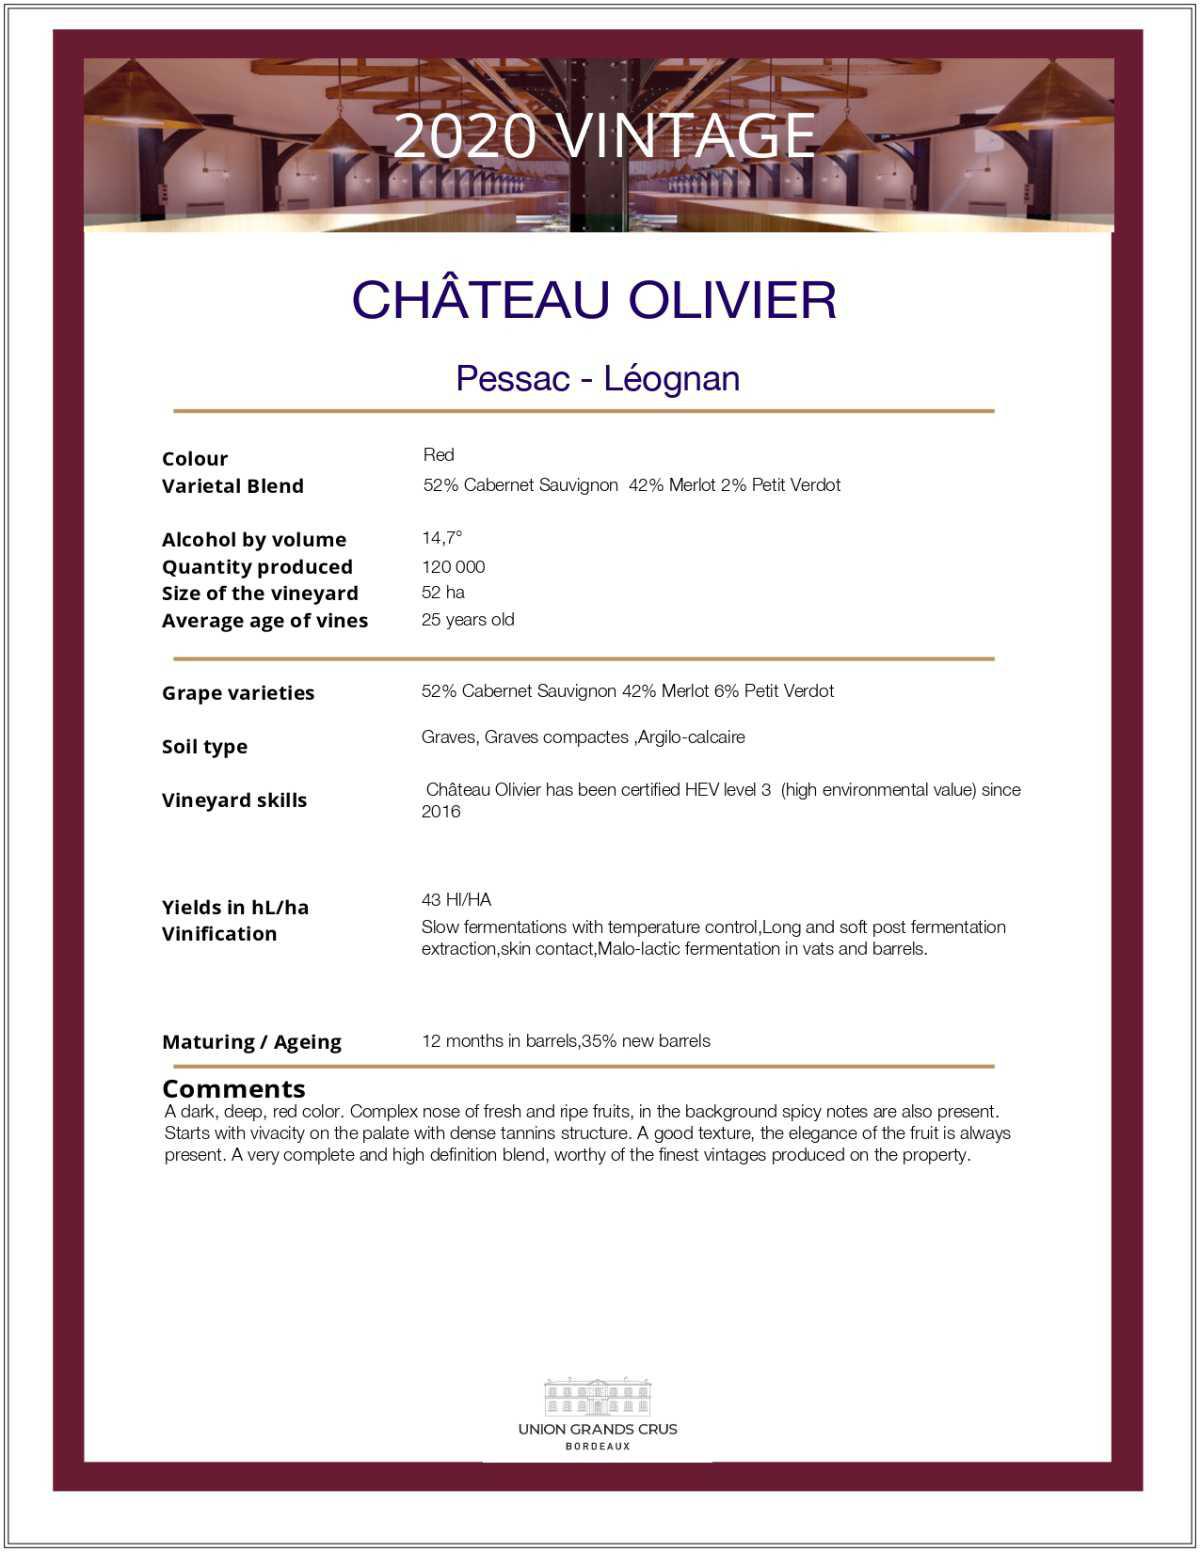 Château Olivier - Red